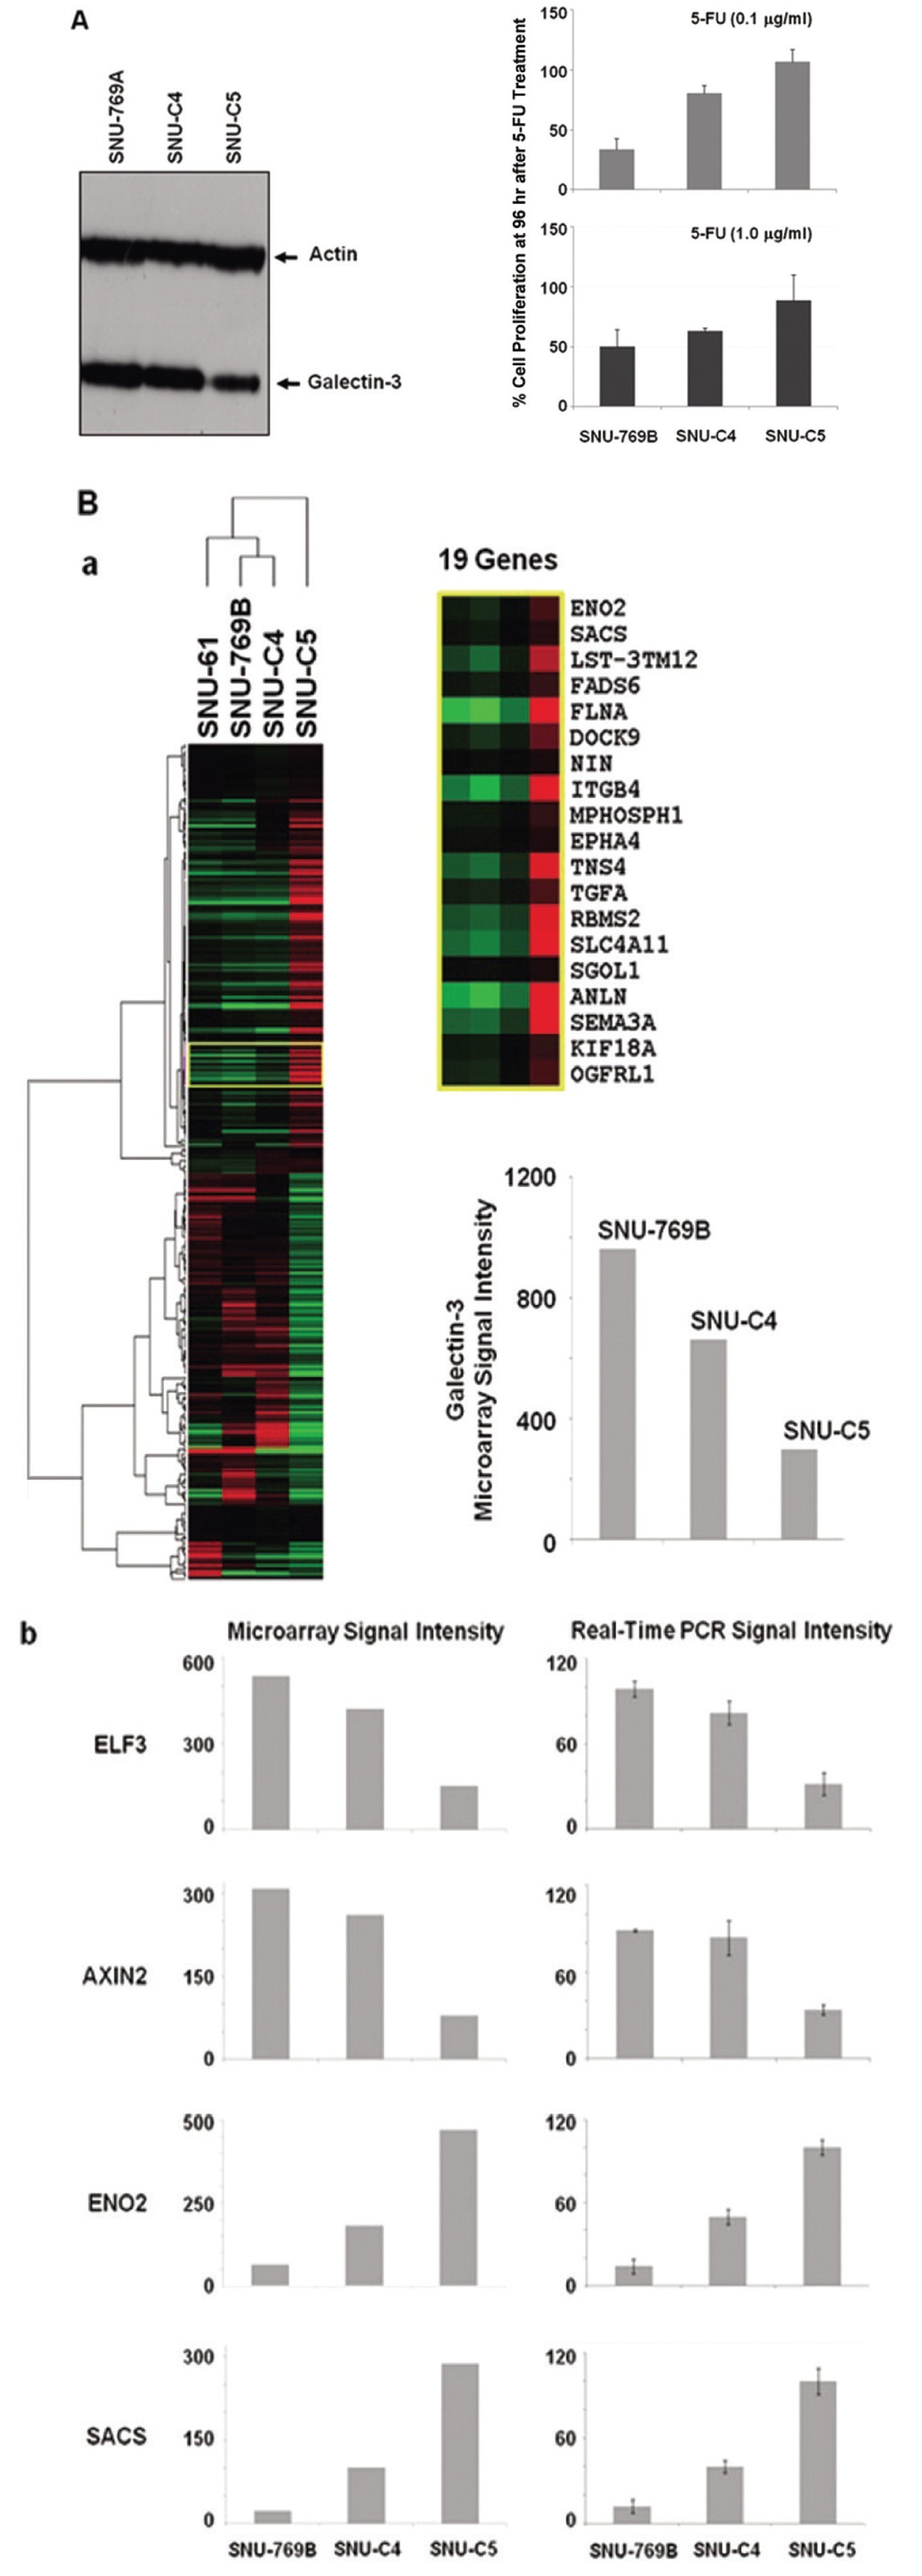 Galectin-3 expression correlated with 5-FU susceptibility in human colon cancer cell lines and gene expression profiling linked to galectin-3. (A) Galectin-3 protein expression correlated with 5-FU susceptibility in three human colon cancer cell lines, SNU-769B, SNU-C4 and SNU-C5. Whole proteomes obtained from the human colon cancer cell lines employed were subjected to SDS-PAGE and were electro-transferred to PVDF membranes for western blot analysis. When galectin-3 expression was higher, human colon cancer cell lines showed more 5-FU susceptibility. (B) Gene expression profiling liked to galectin-3. To satisfy minimum clustering sample size, we added SNU-61, which has almost the same 5-FU susceptibility as SNU-769B, and as shown in the enlarged yellow box, genes linked to galectin-3 expression were selected (a). The expressional profiling was further confirmed by using real-time PCR as shown in panel (b). All genes showing positive and negative expressional correlations with galectin-3 are listed in Tables 2 and 3, respectively.